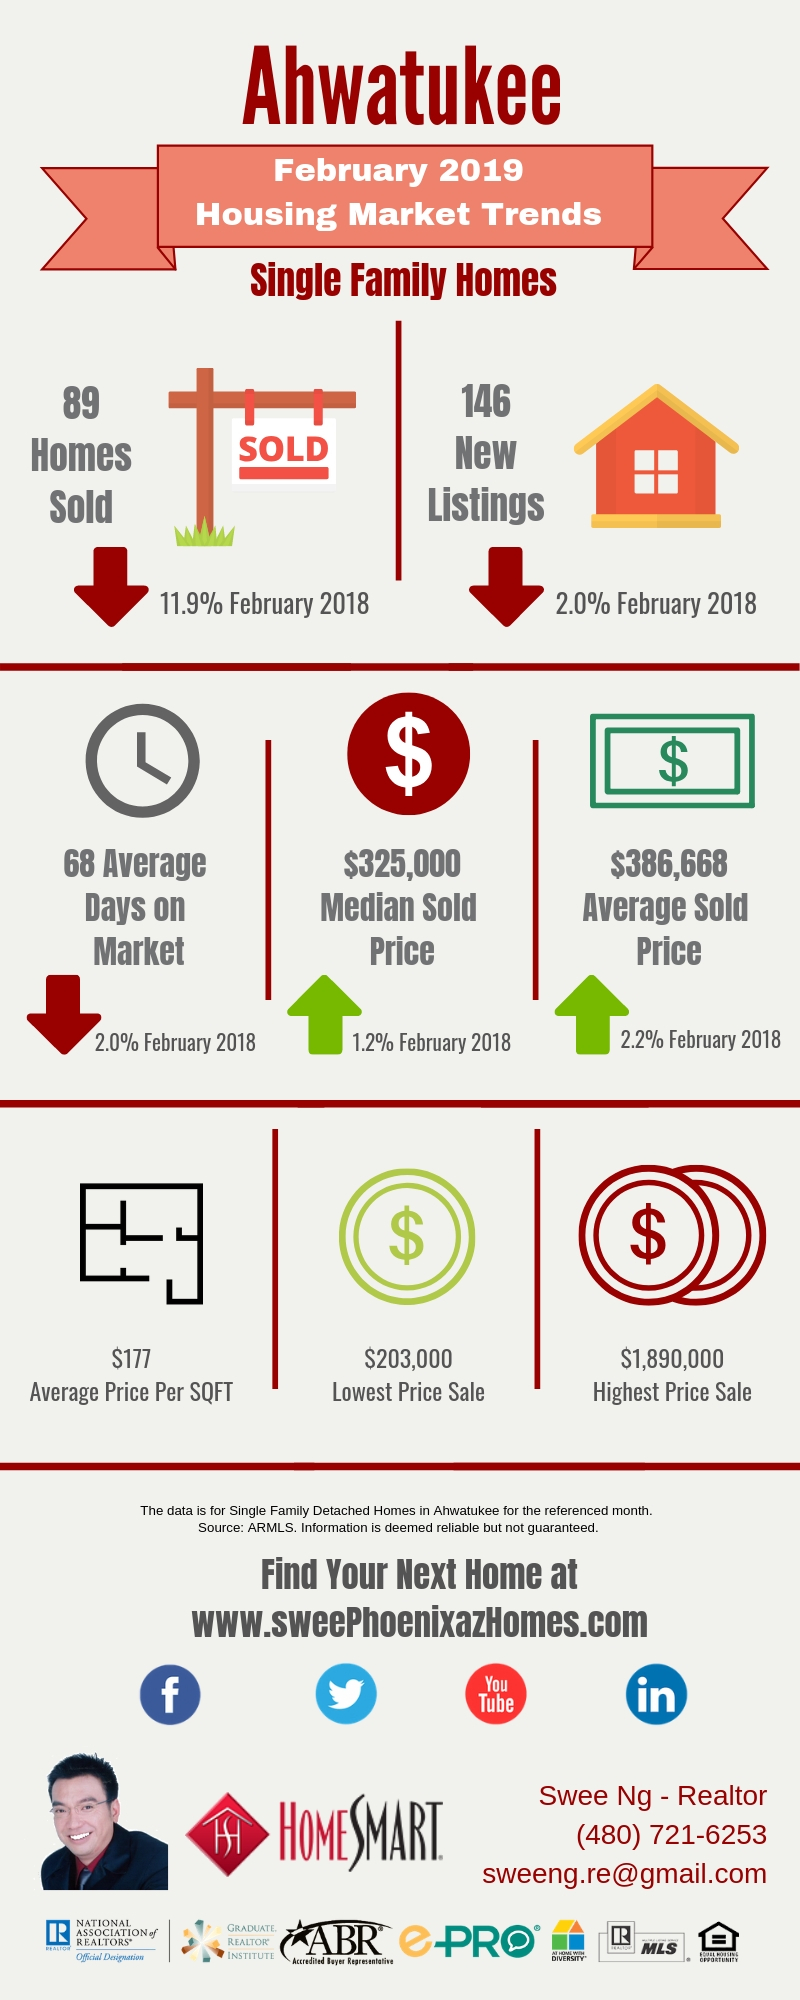 Ahwatukee Housing Market Trends Report February 2019, House Value, Real Estate and Statistic by Swee Ng